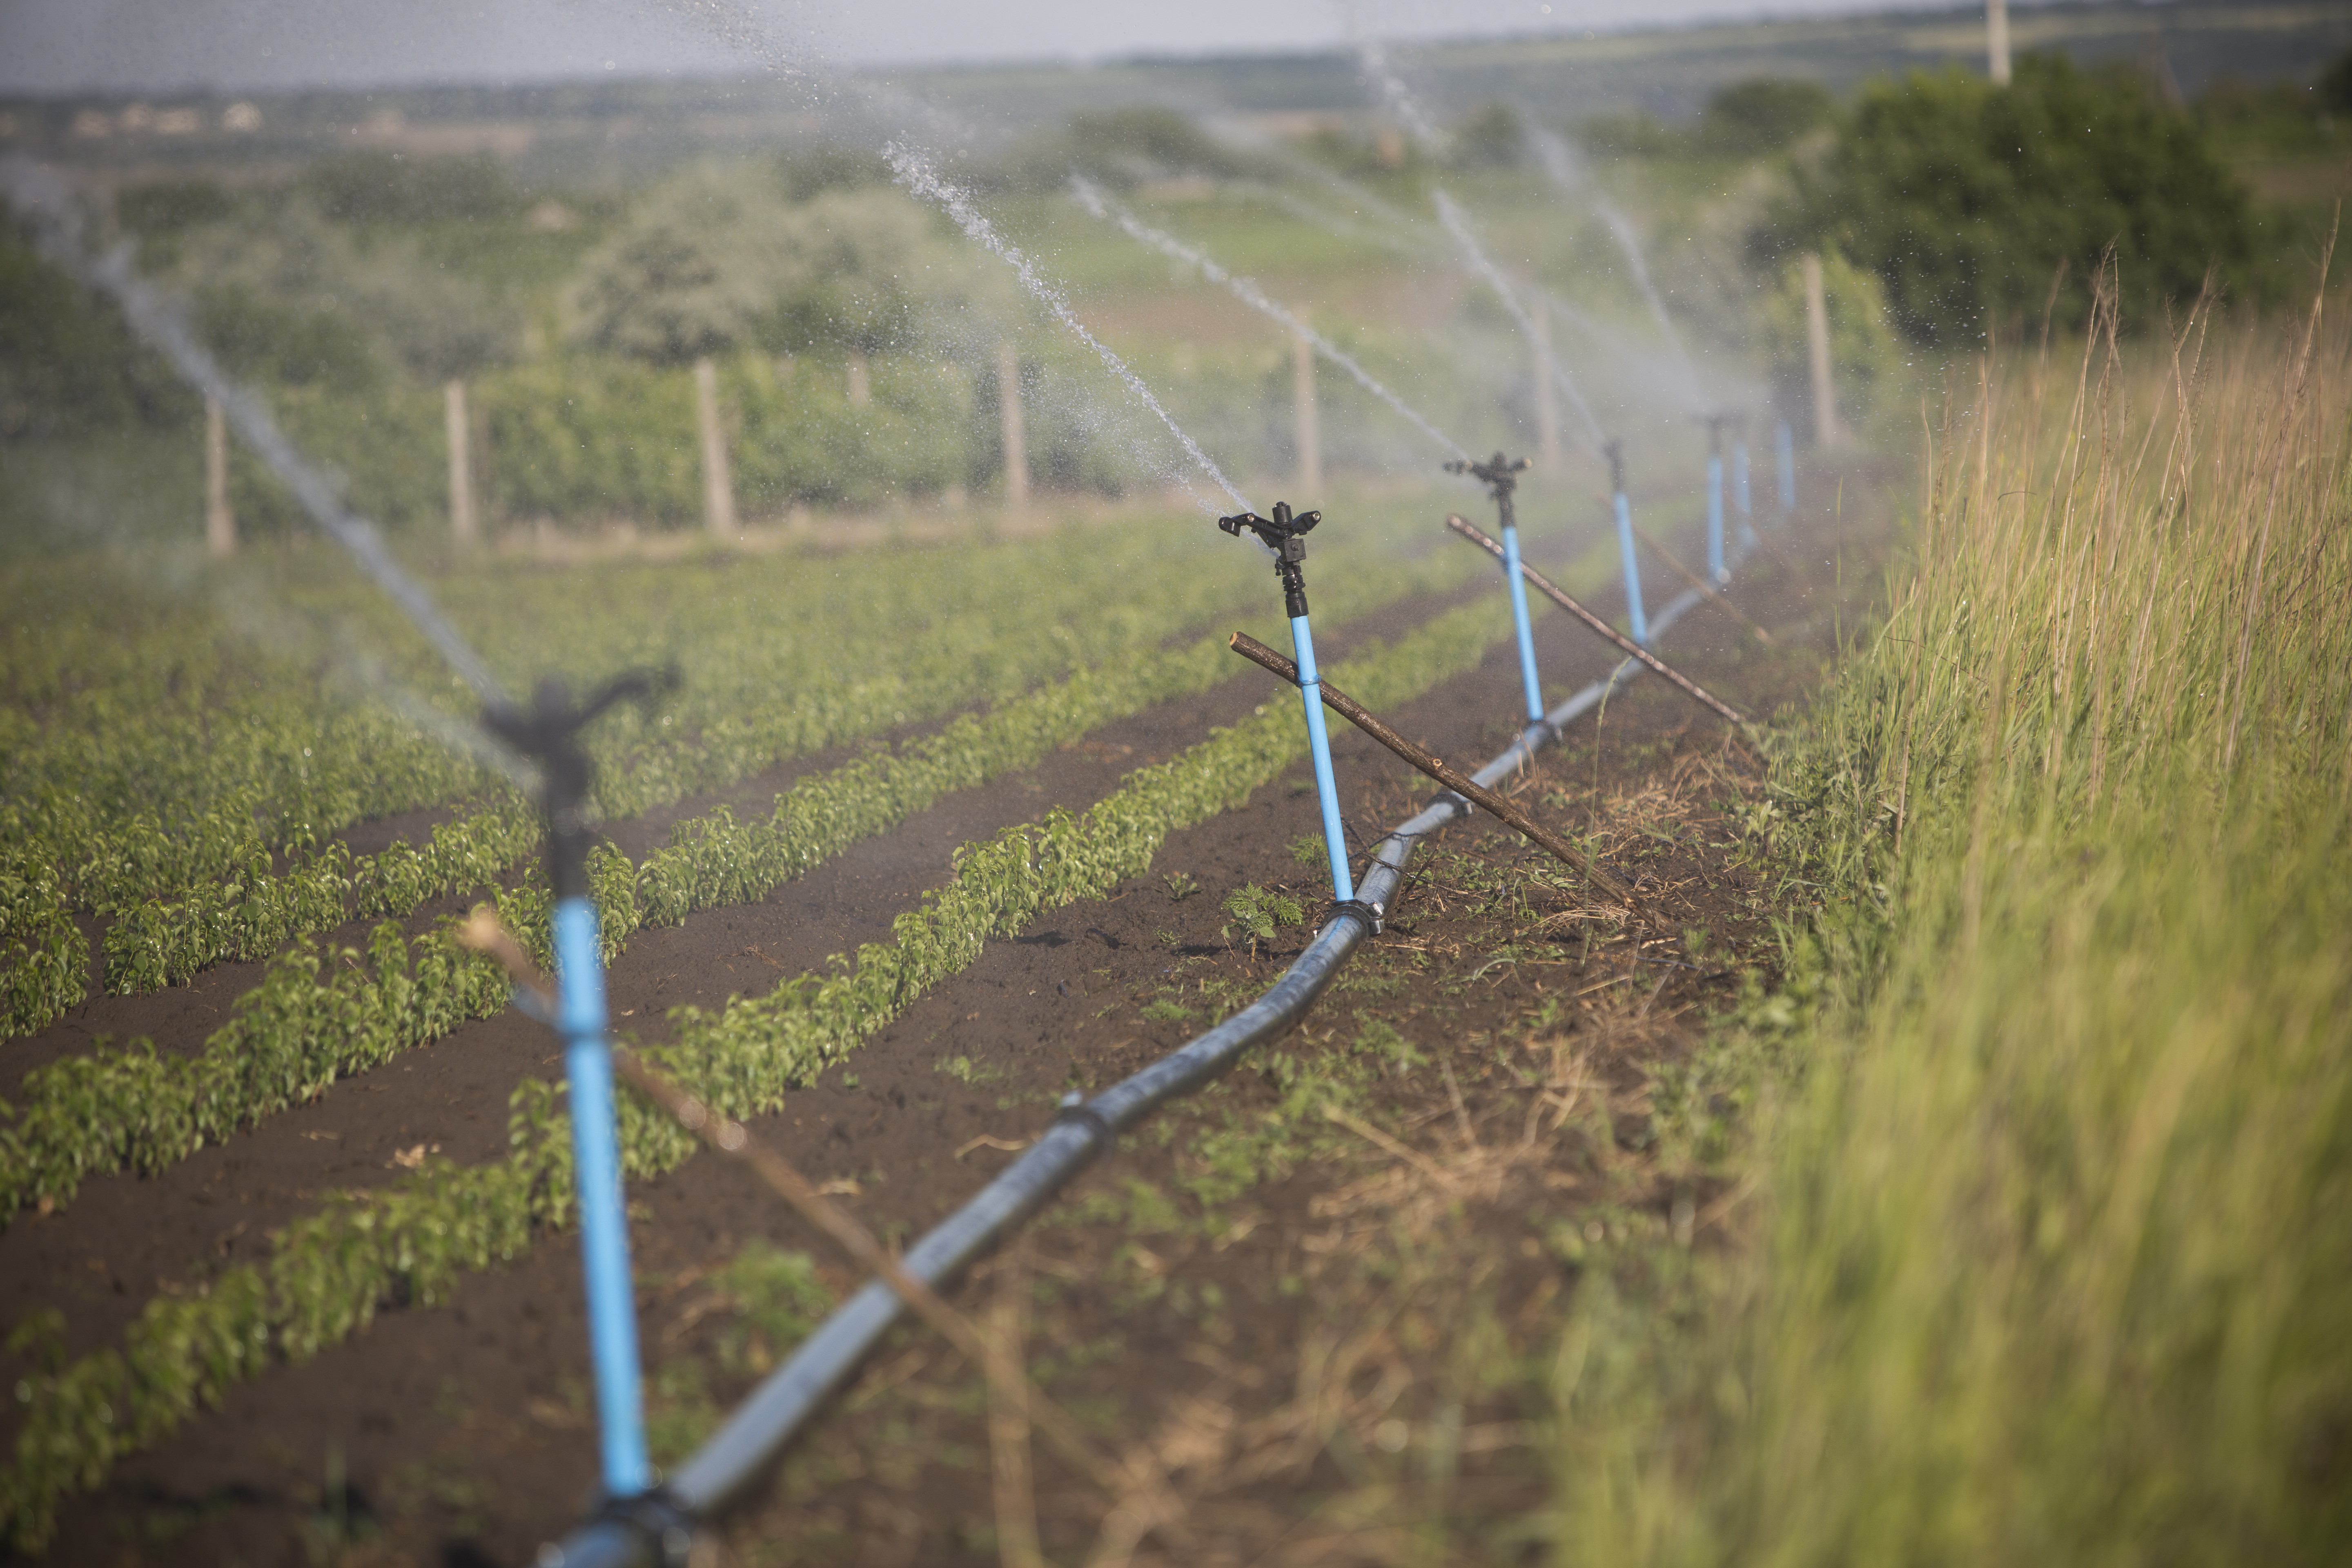 MCC's five-year, $262 million compact with Moldova helped organize water users associations that manage modern irrigation systems, supporting the production of high-value agricultural products.